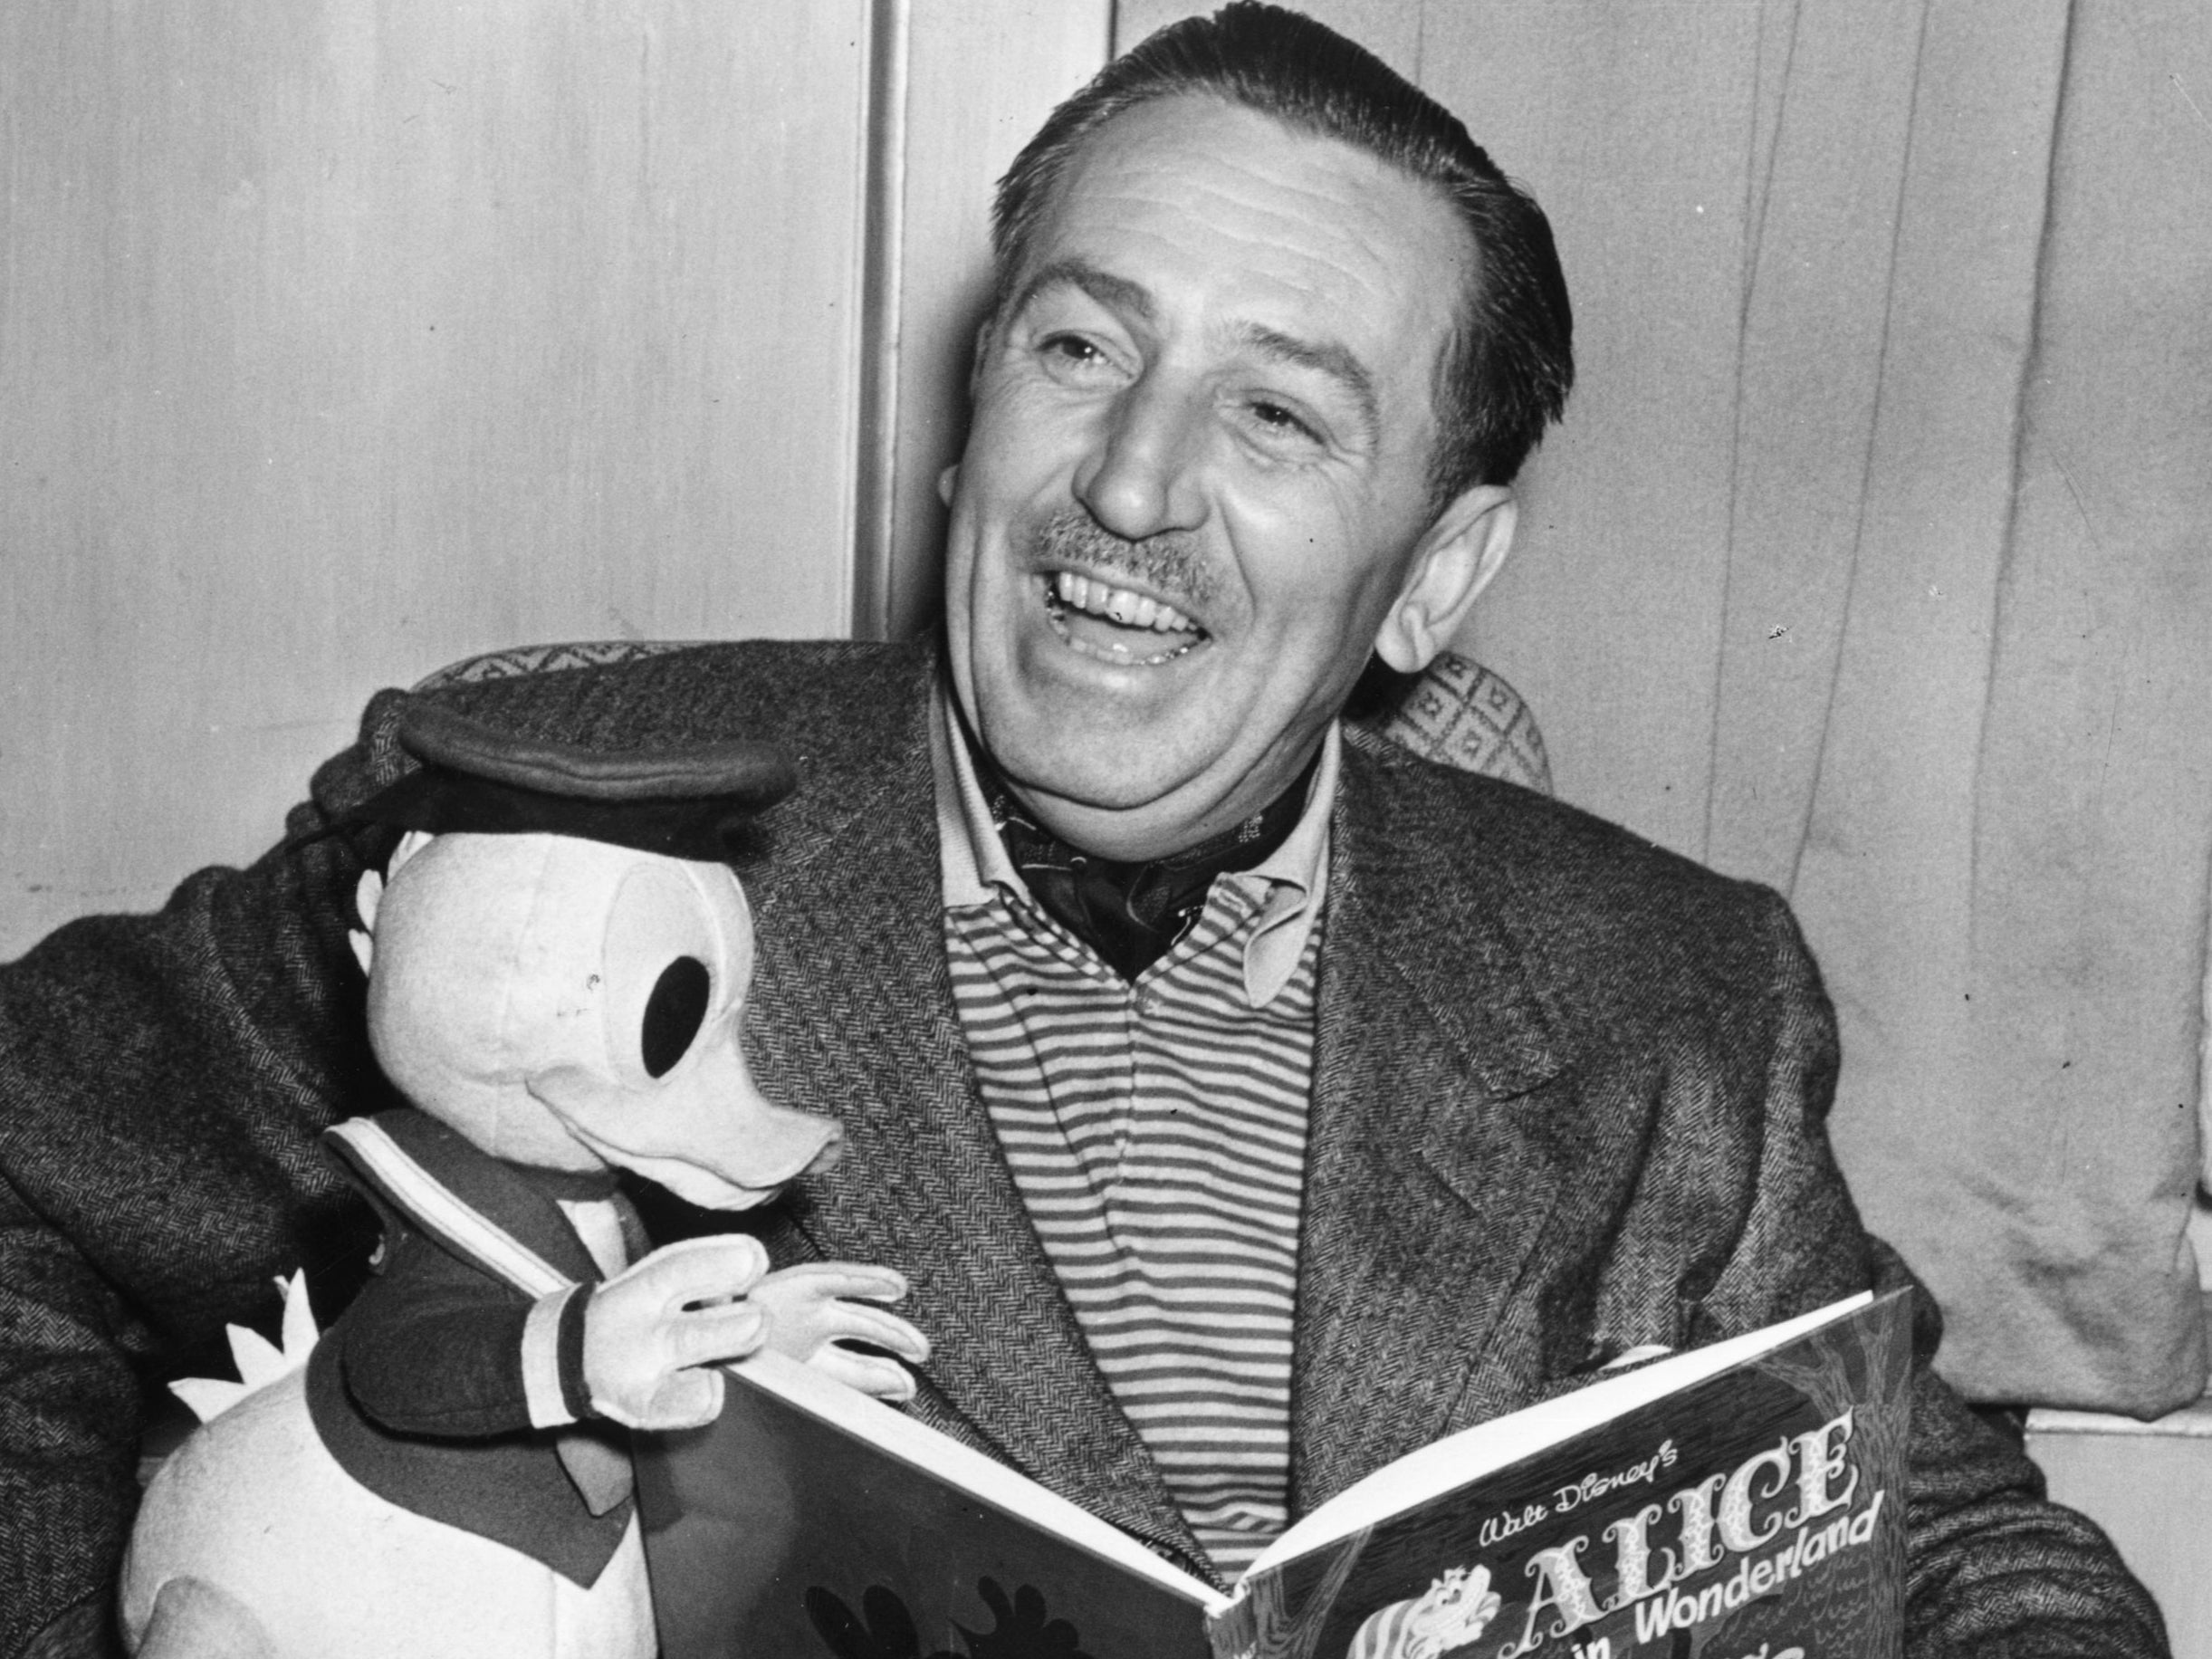 Walt Disney is both a beloved and controversial figure in American history